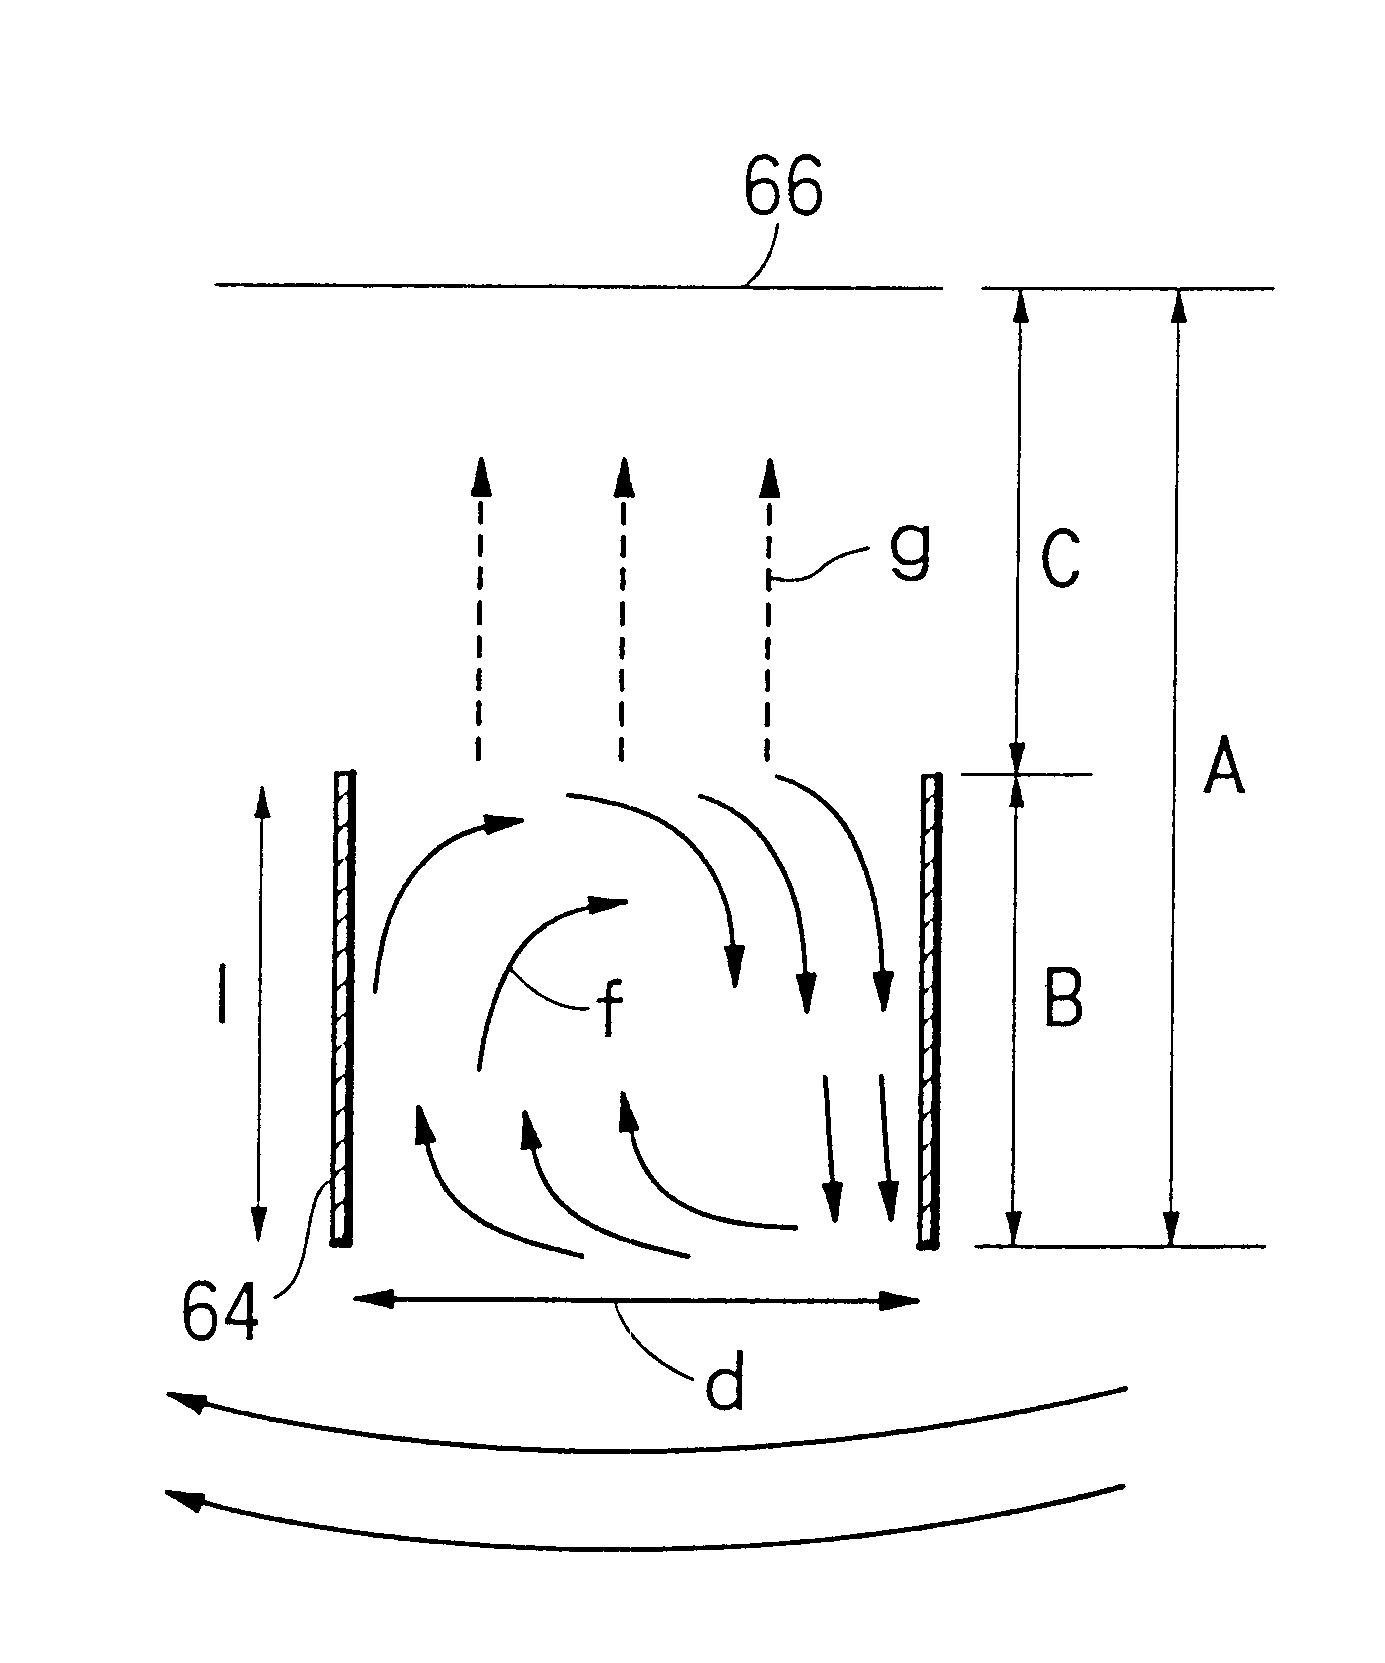 Apparatus and method for crystallization